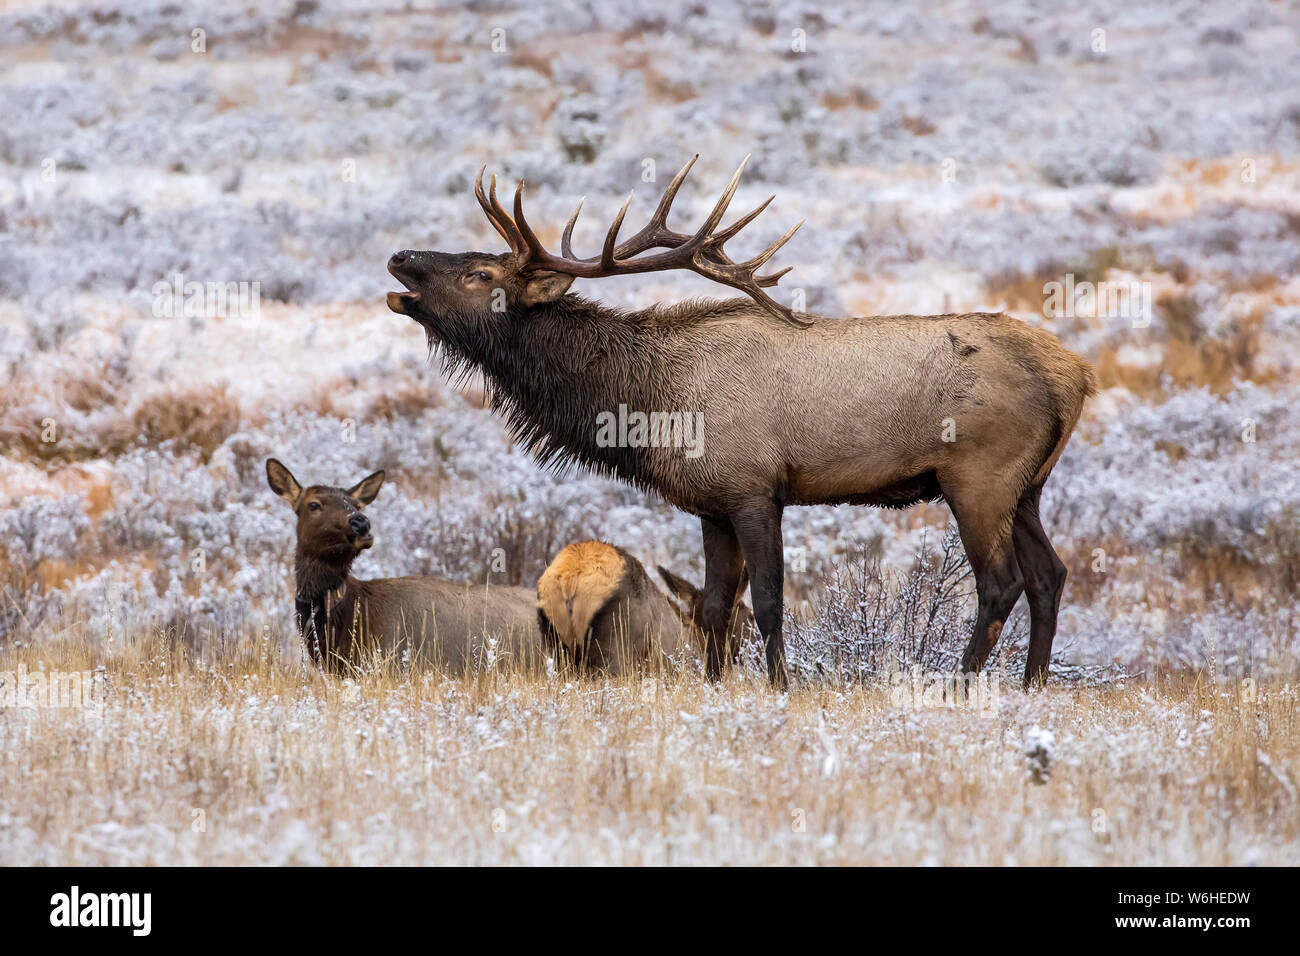 Bull elk (Cervus canadensis) bugling with cow elk in the background; Denver, Colorado, United States of America Stock Photo